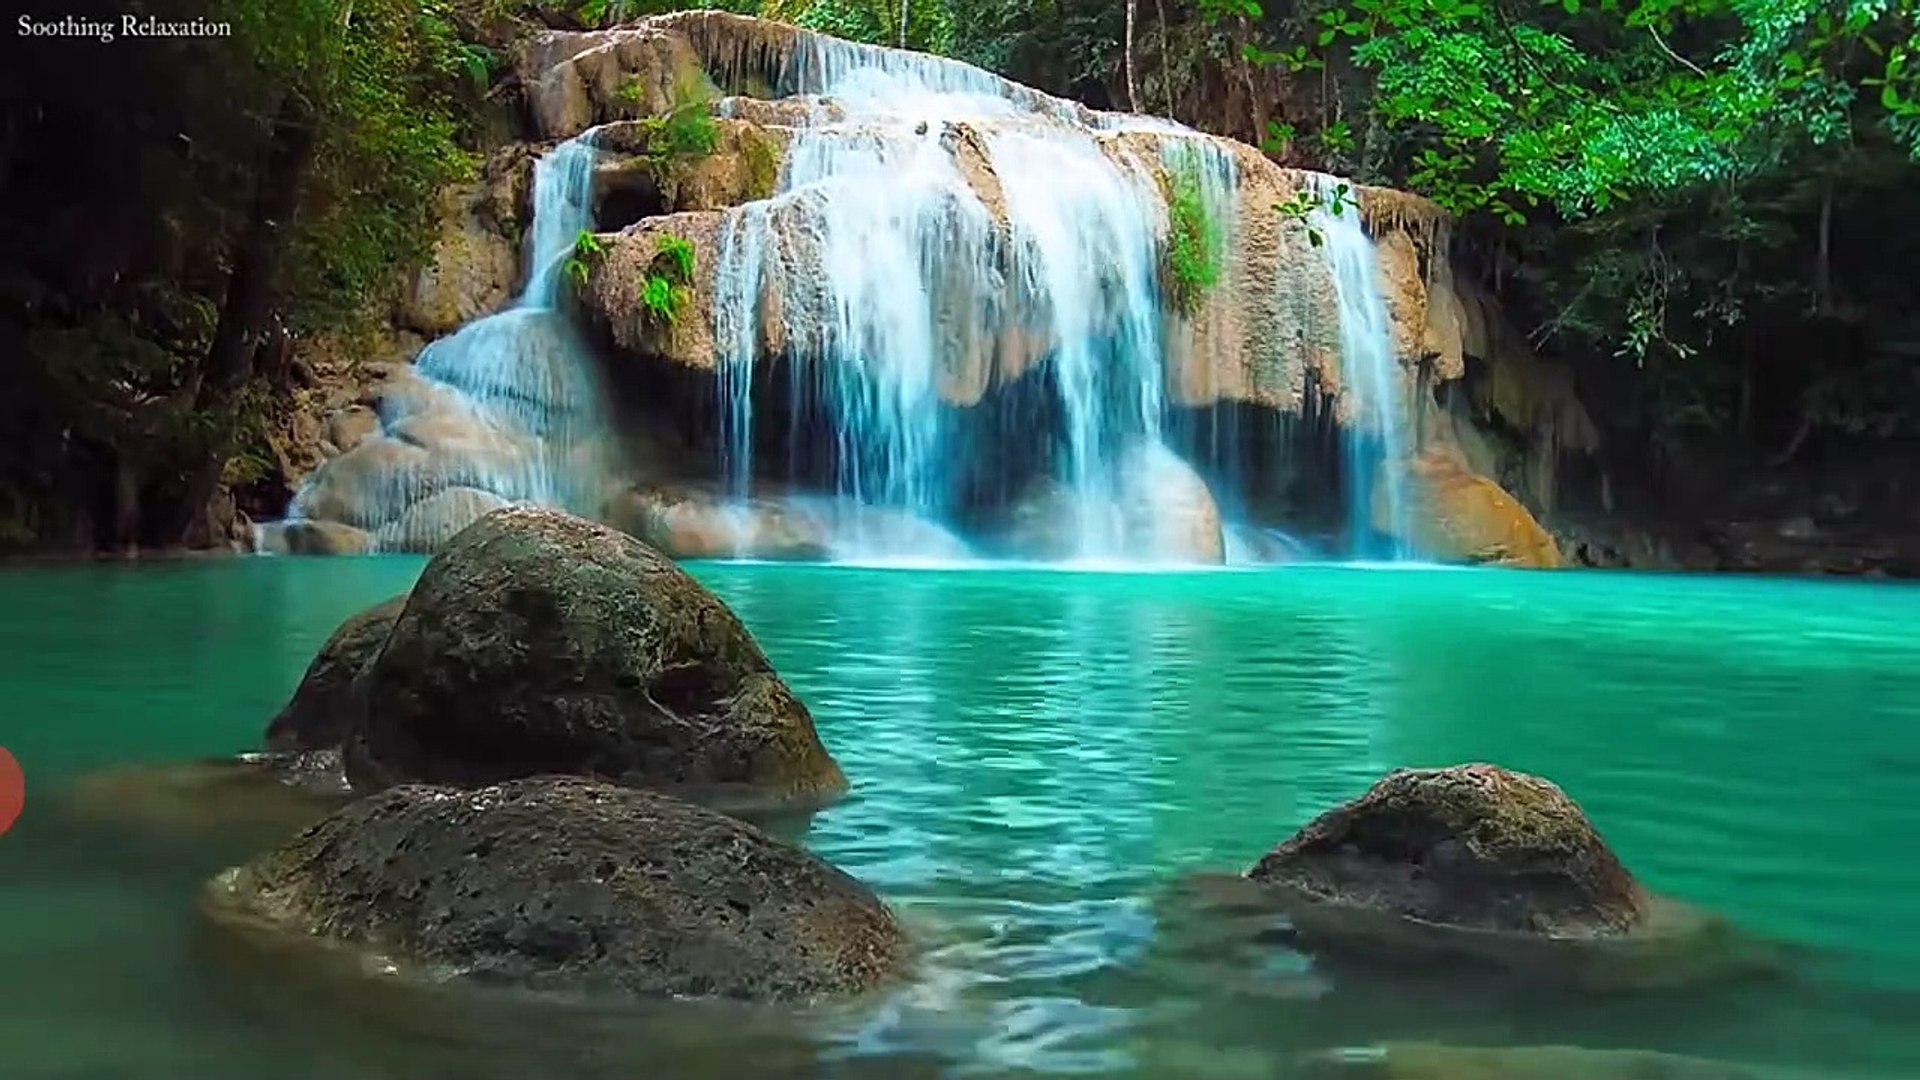 Meditation music:Water falling Relaxation and stress reliever music , healing sounds